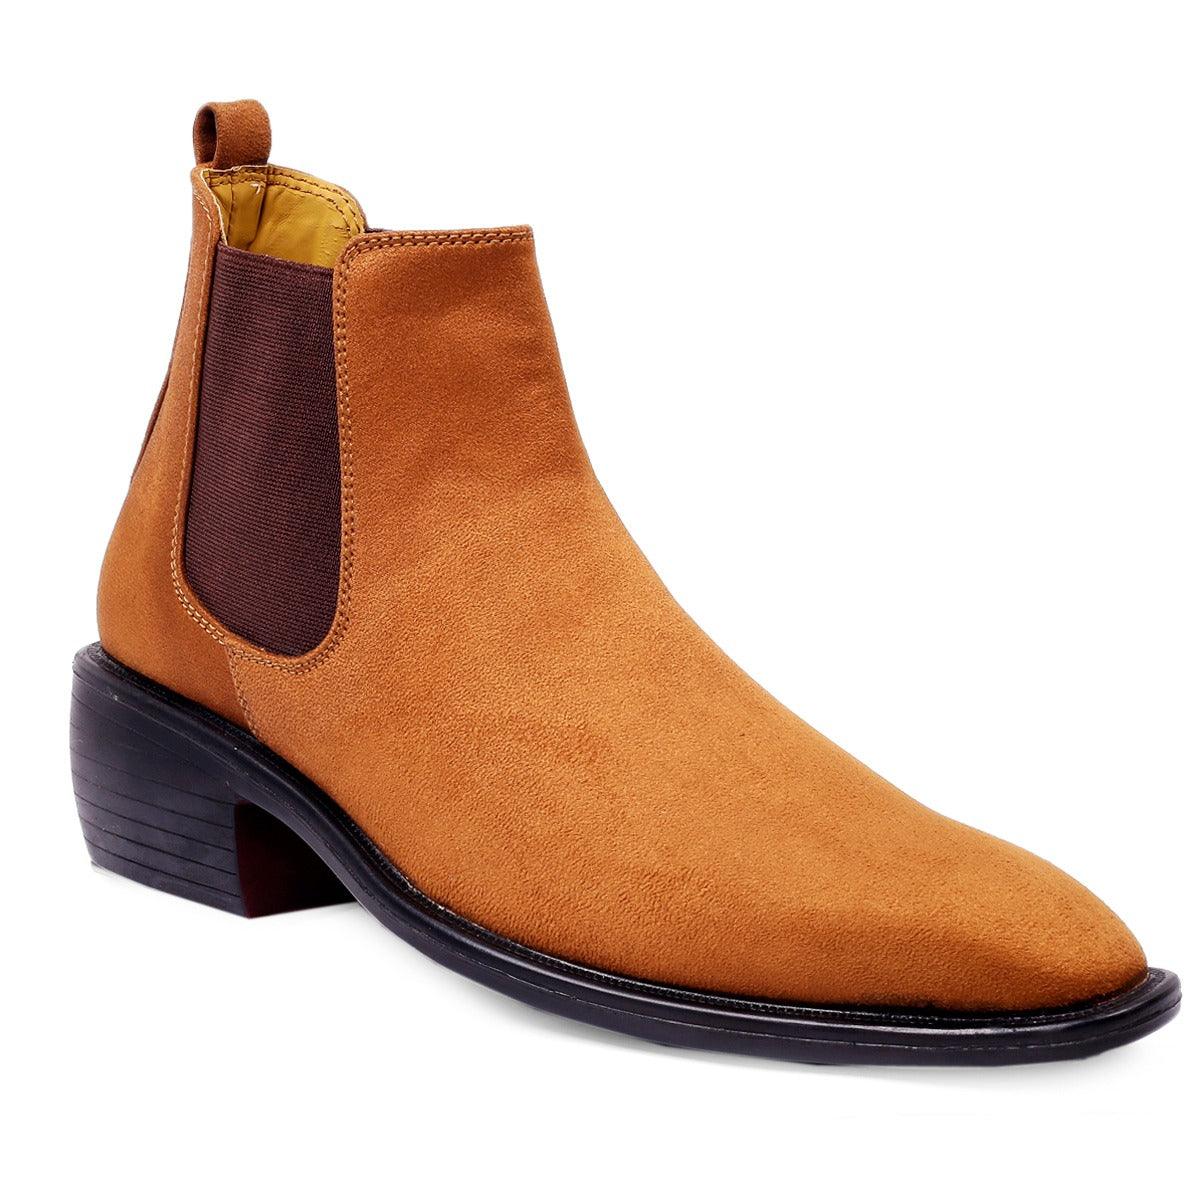 Height Increasing Tan Suede Chelsea Cuba Boots For Men